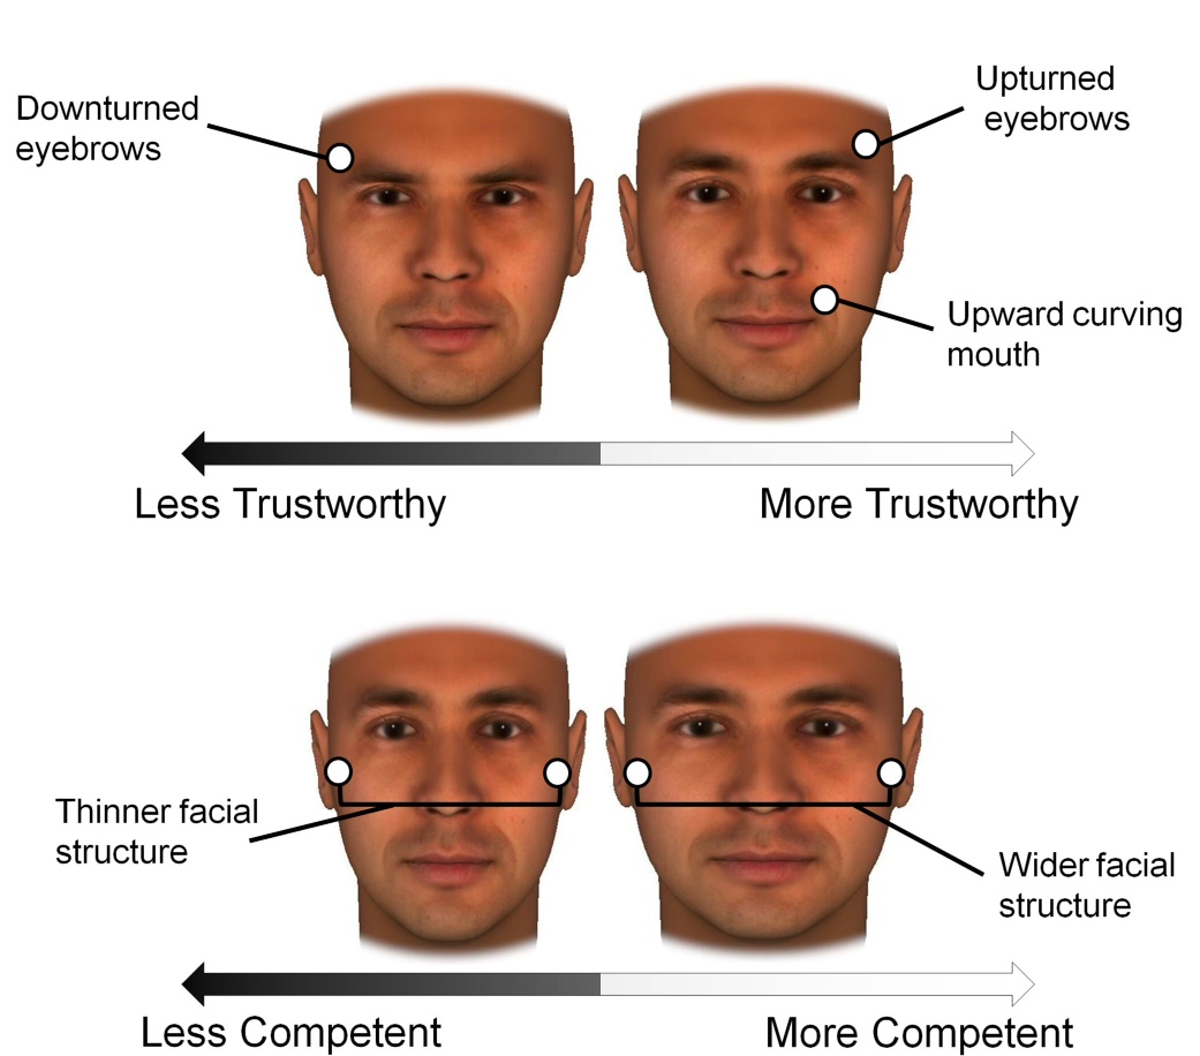 Your Facial Bone Structure Has a Big Influence on How People See